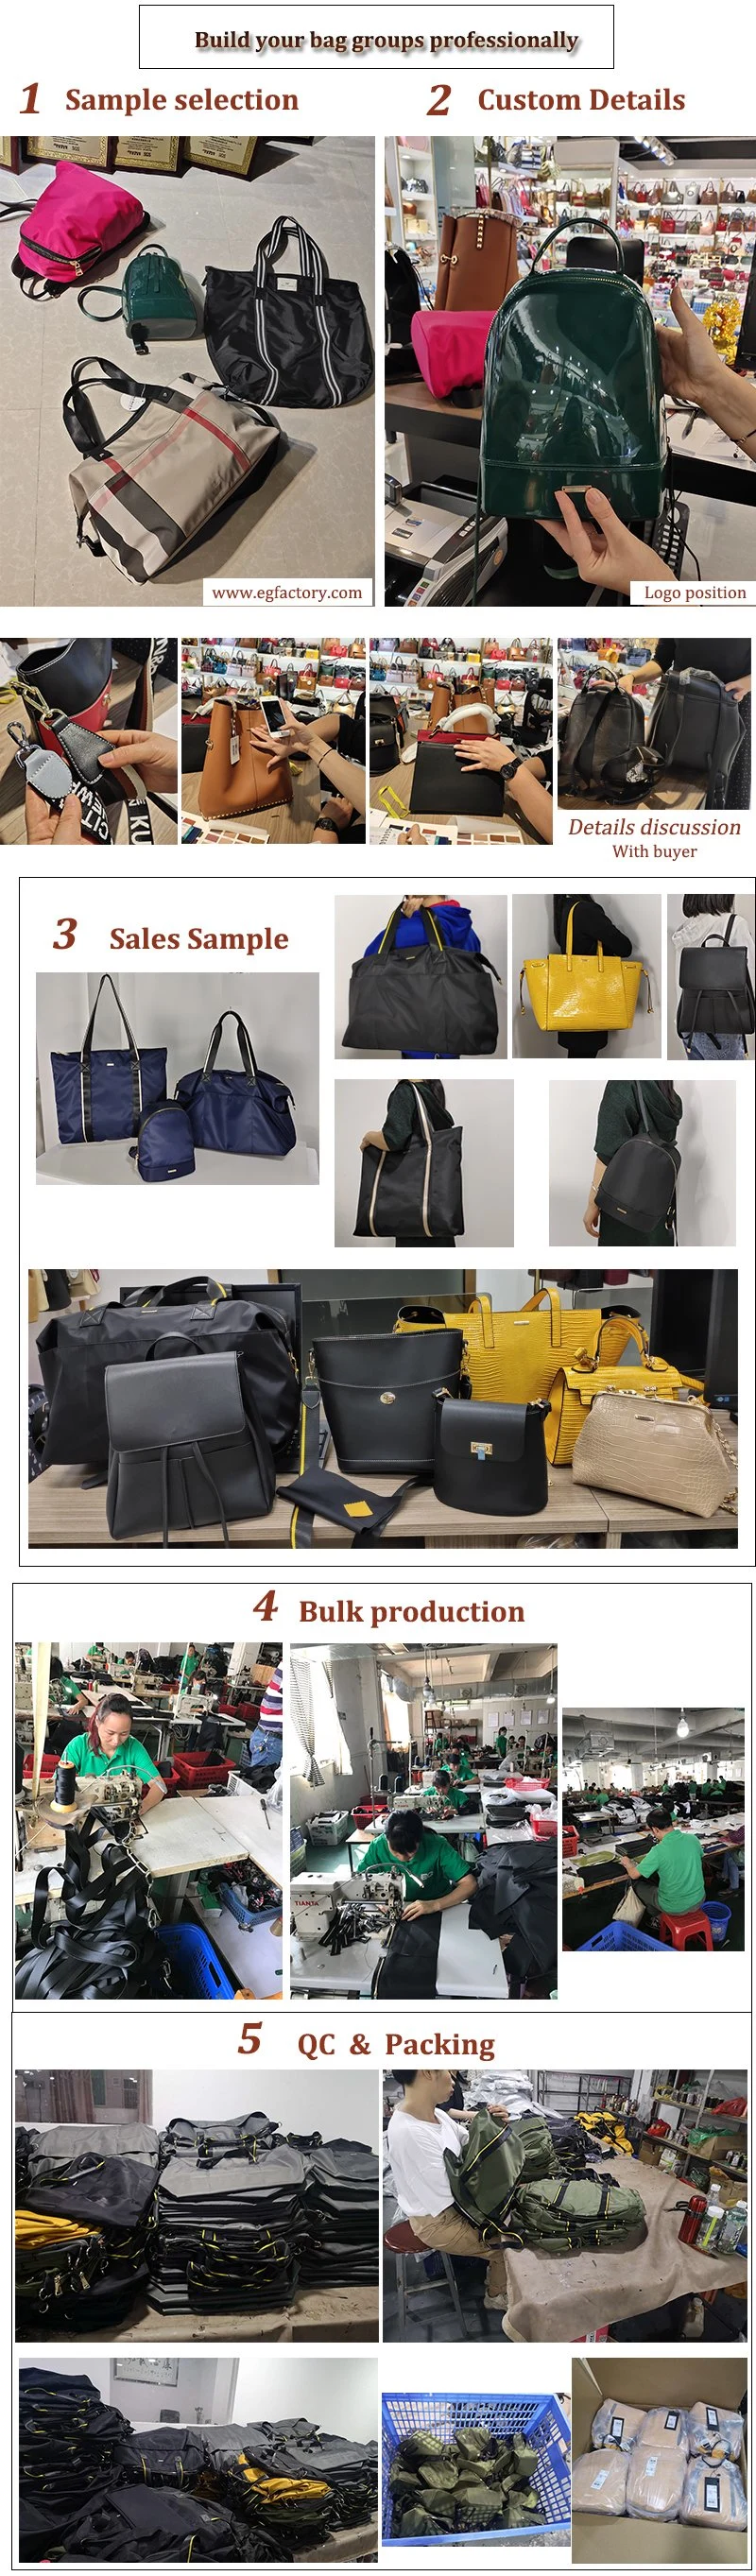 18 Yrs Professional Bag Manufacturer|Trusted by Giordano & Walmart|2 Factories, 1 Big Showroom|3, 500 Fashion Styles|Customized Order Expert, Welcome Visit Us!